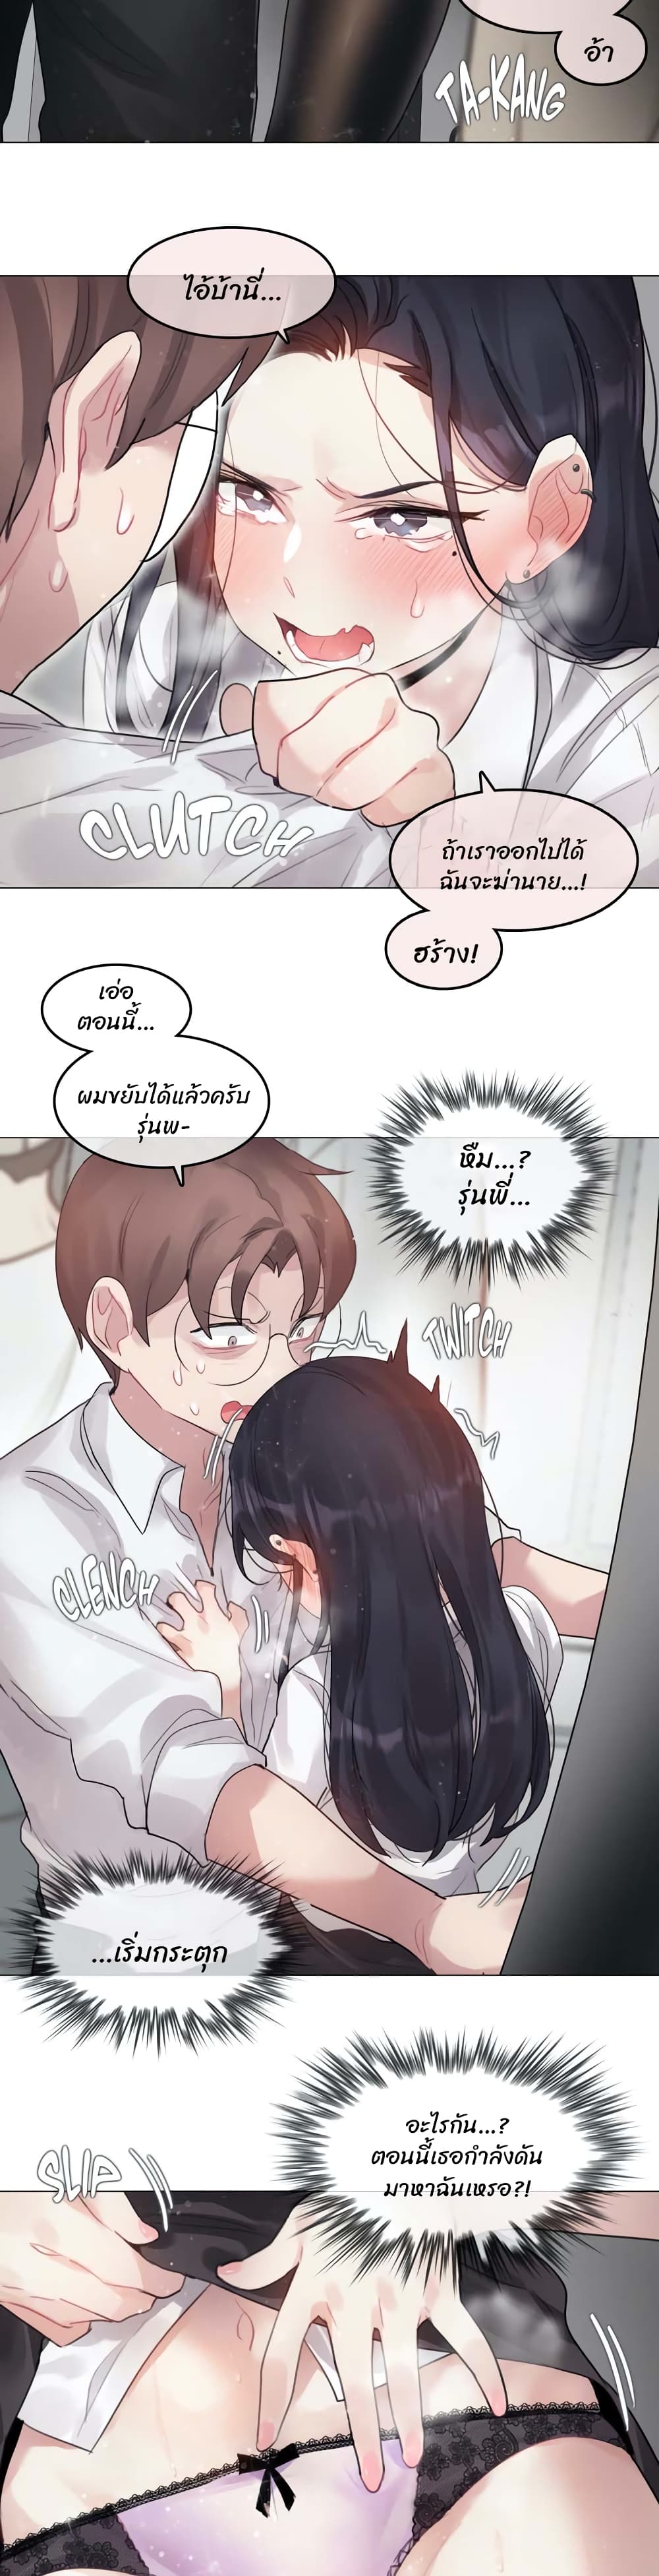 A Pervert's Daily Life 98 (15)